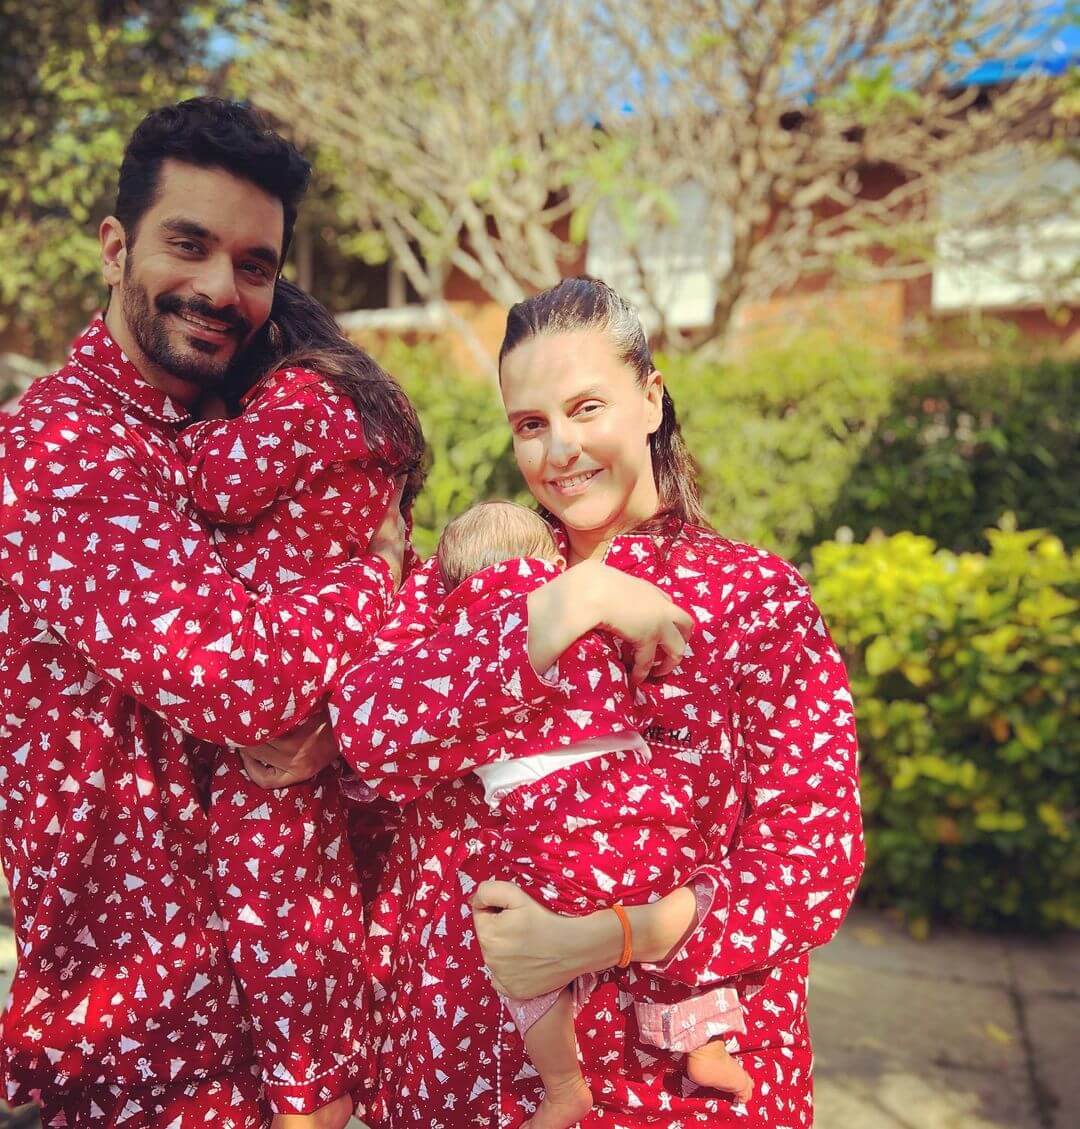 Neha Dhupia, Angad Bedi, And Their Kids In Matching Outfits For Christmas